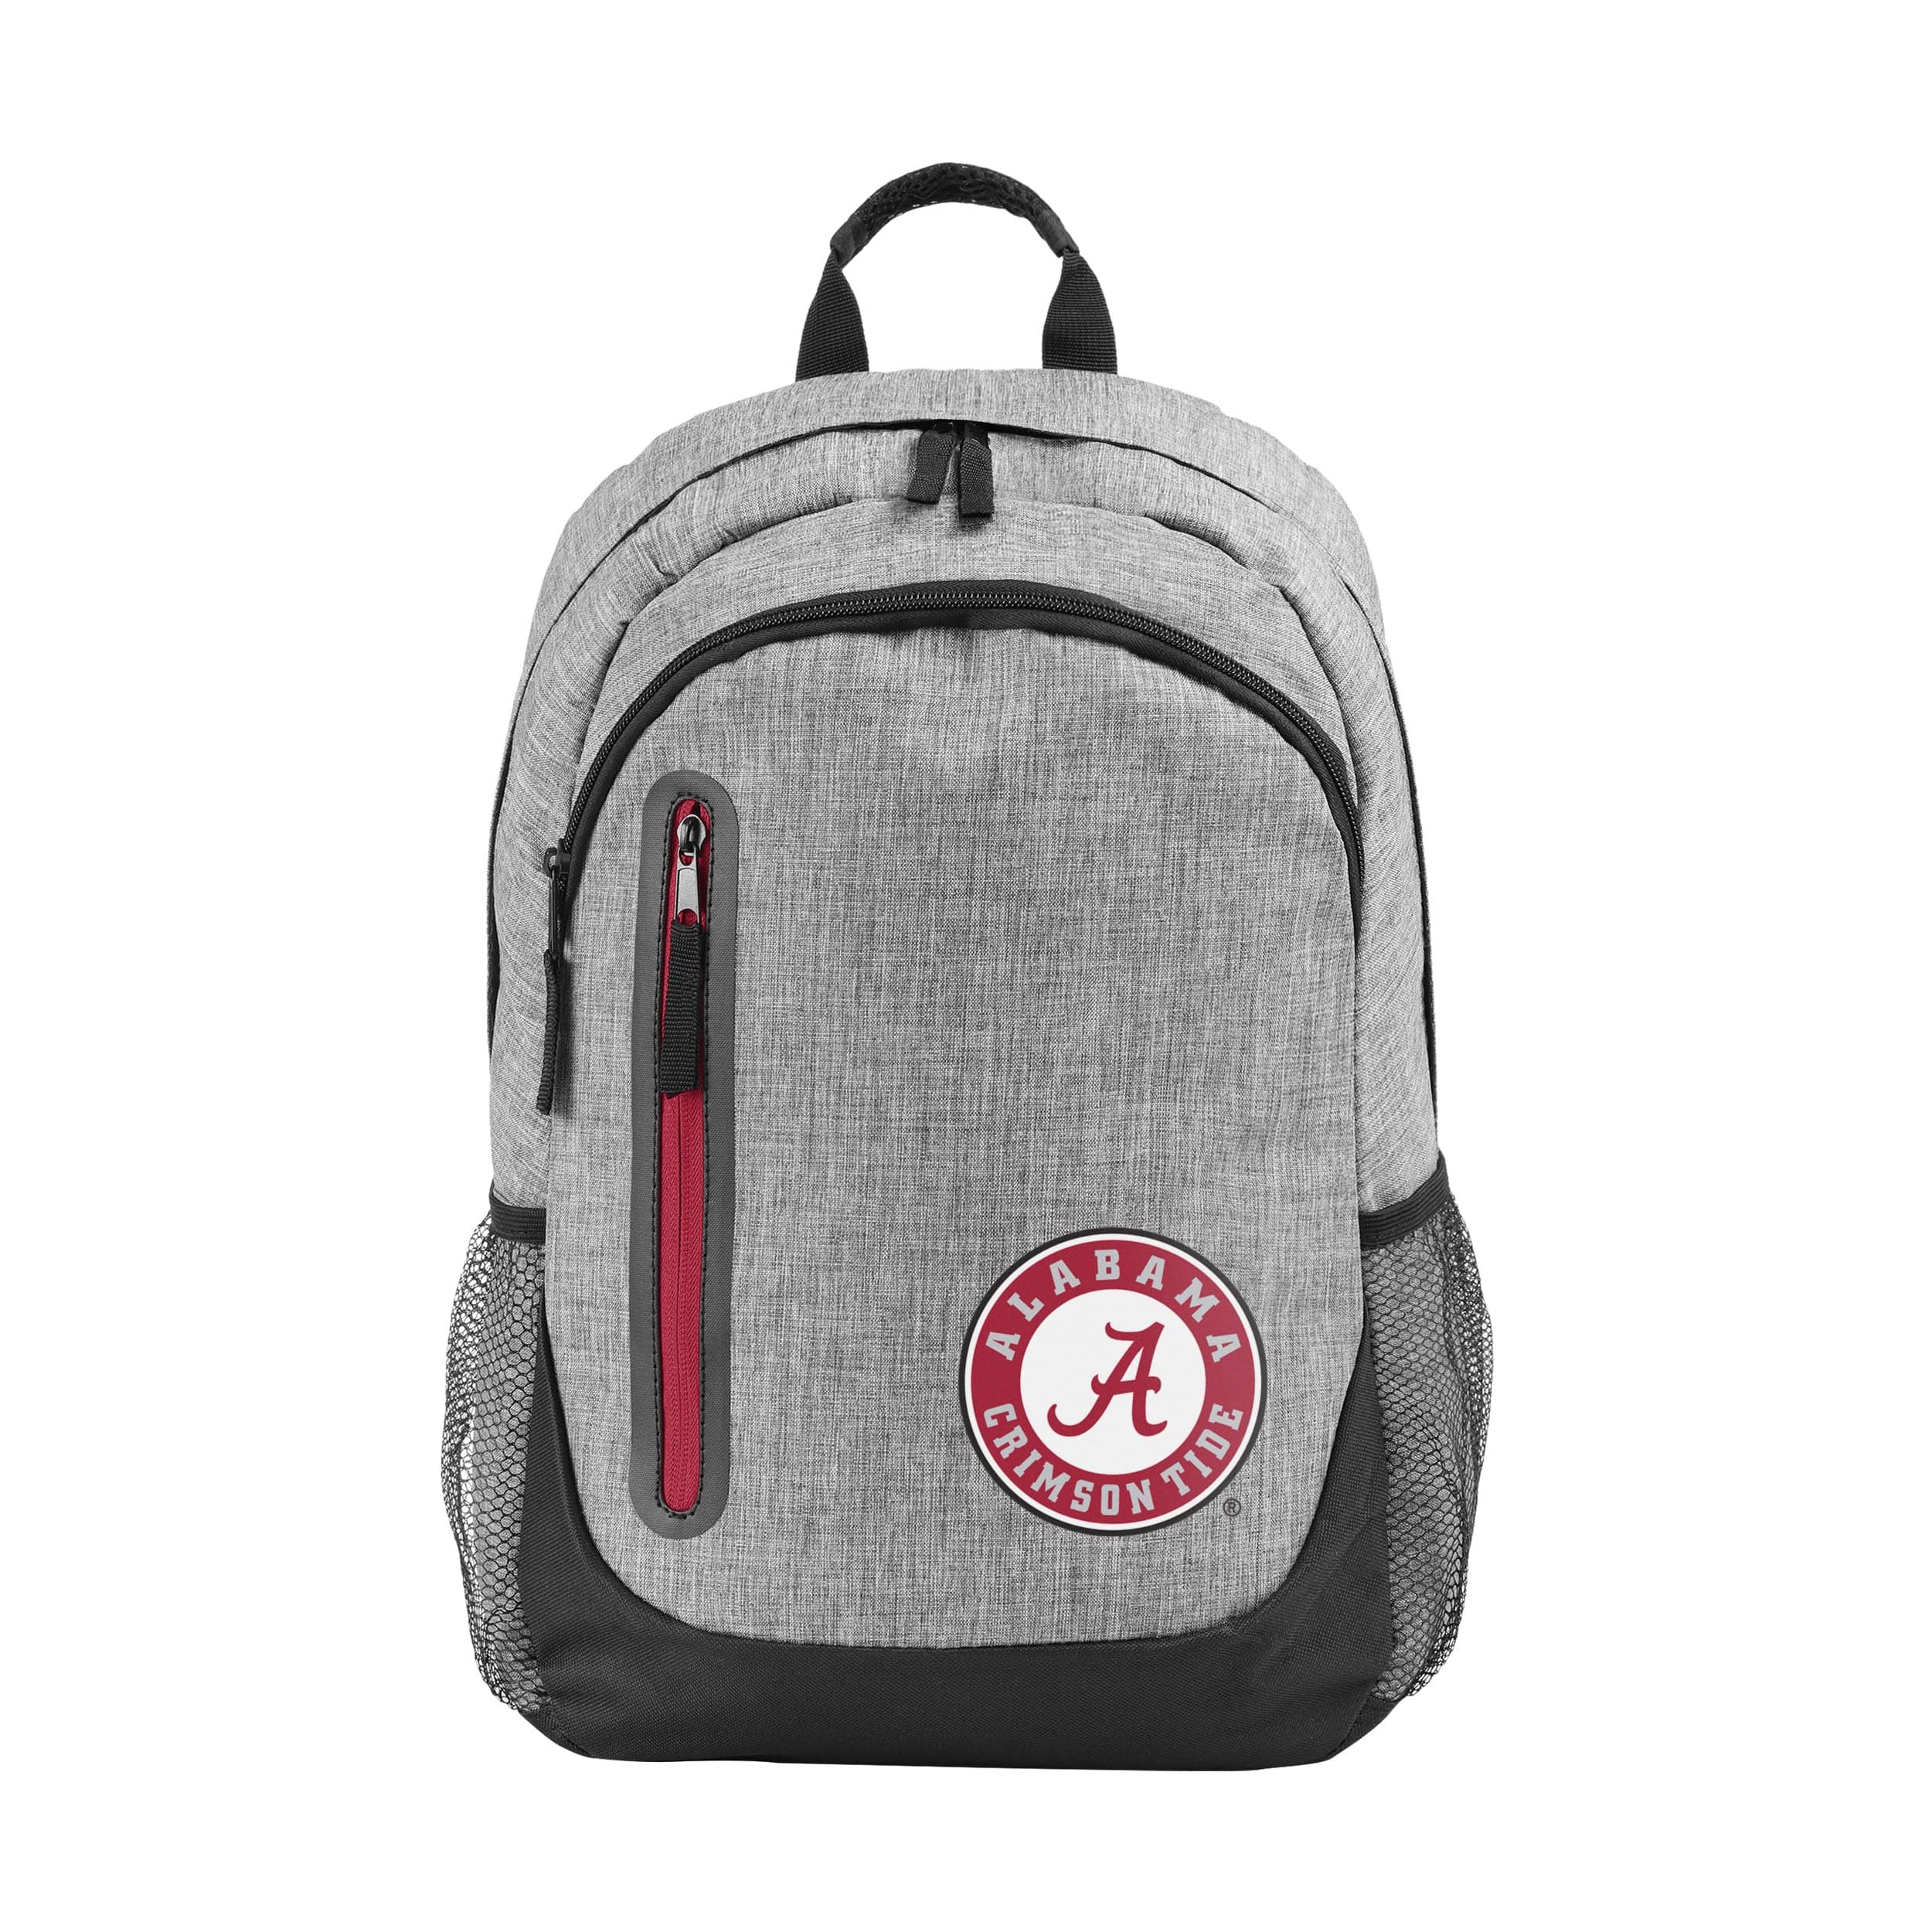 Simple Modern Officially Licensed Collegiate Backpack with Laptop Sleeve,  Team Color, 20L Alabama Crimson Tide